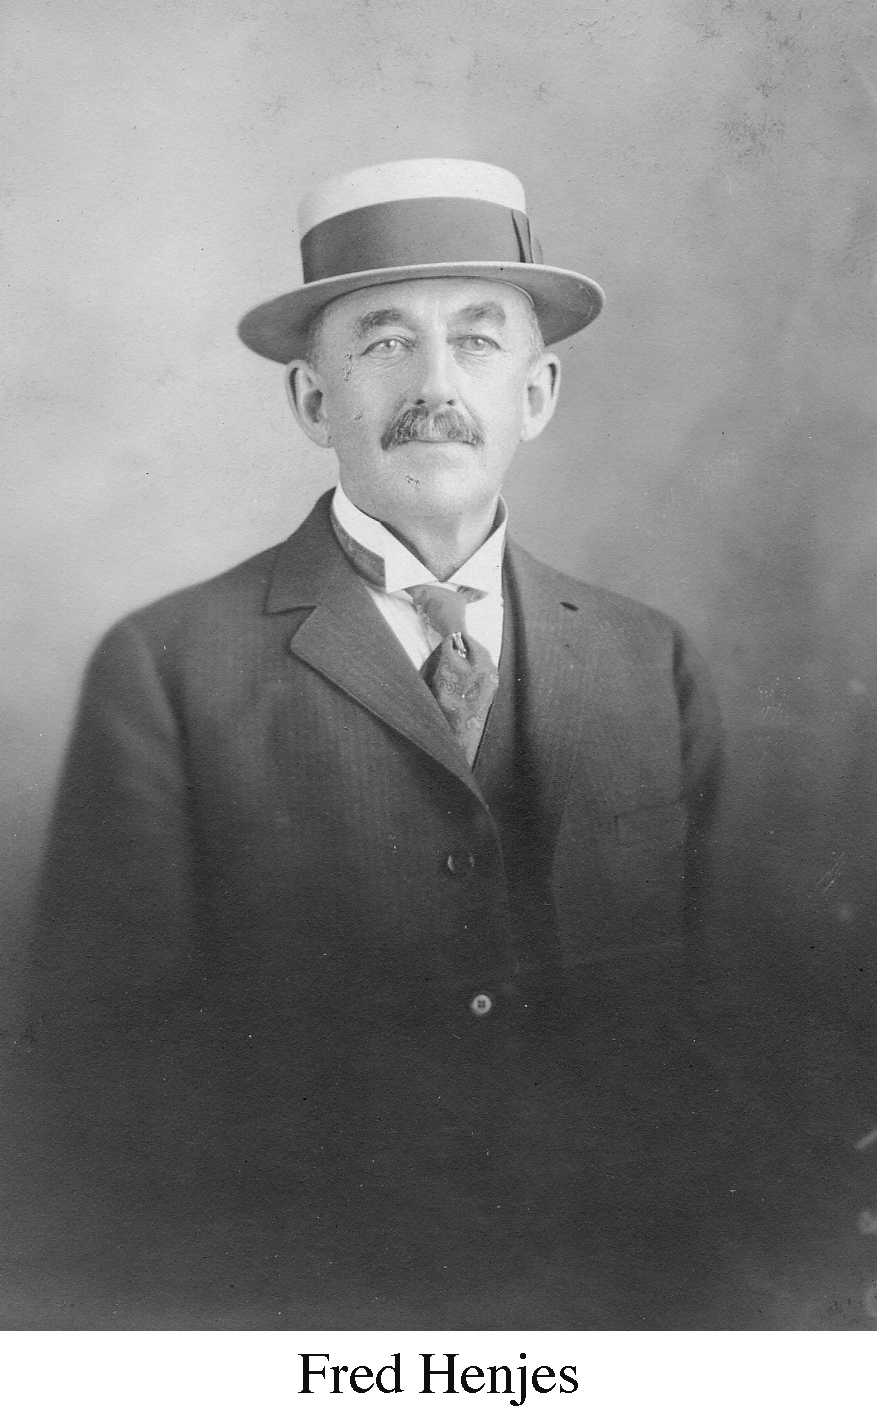 Fred Henjes wearing a coat, tie, and a brimmed hat